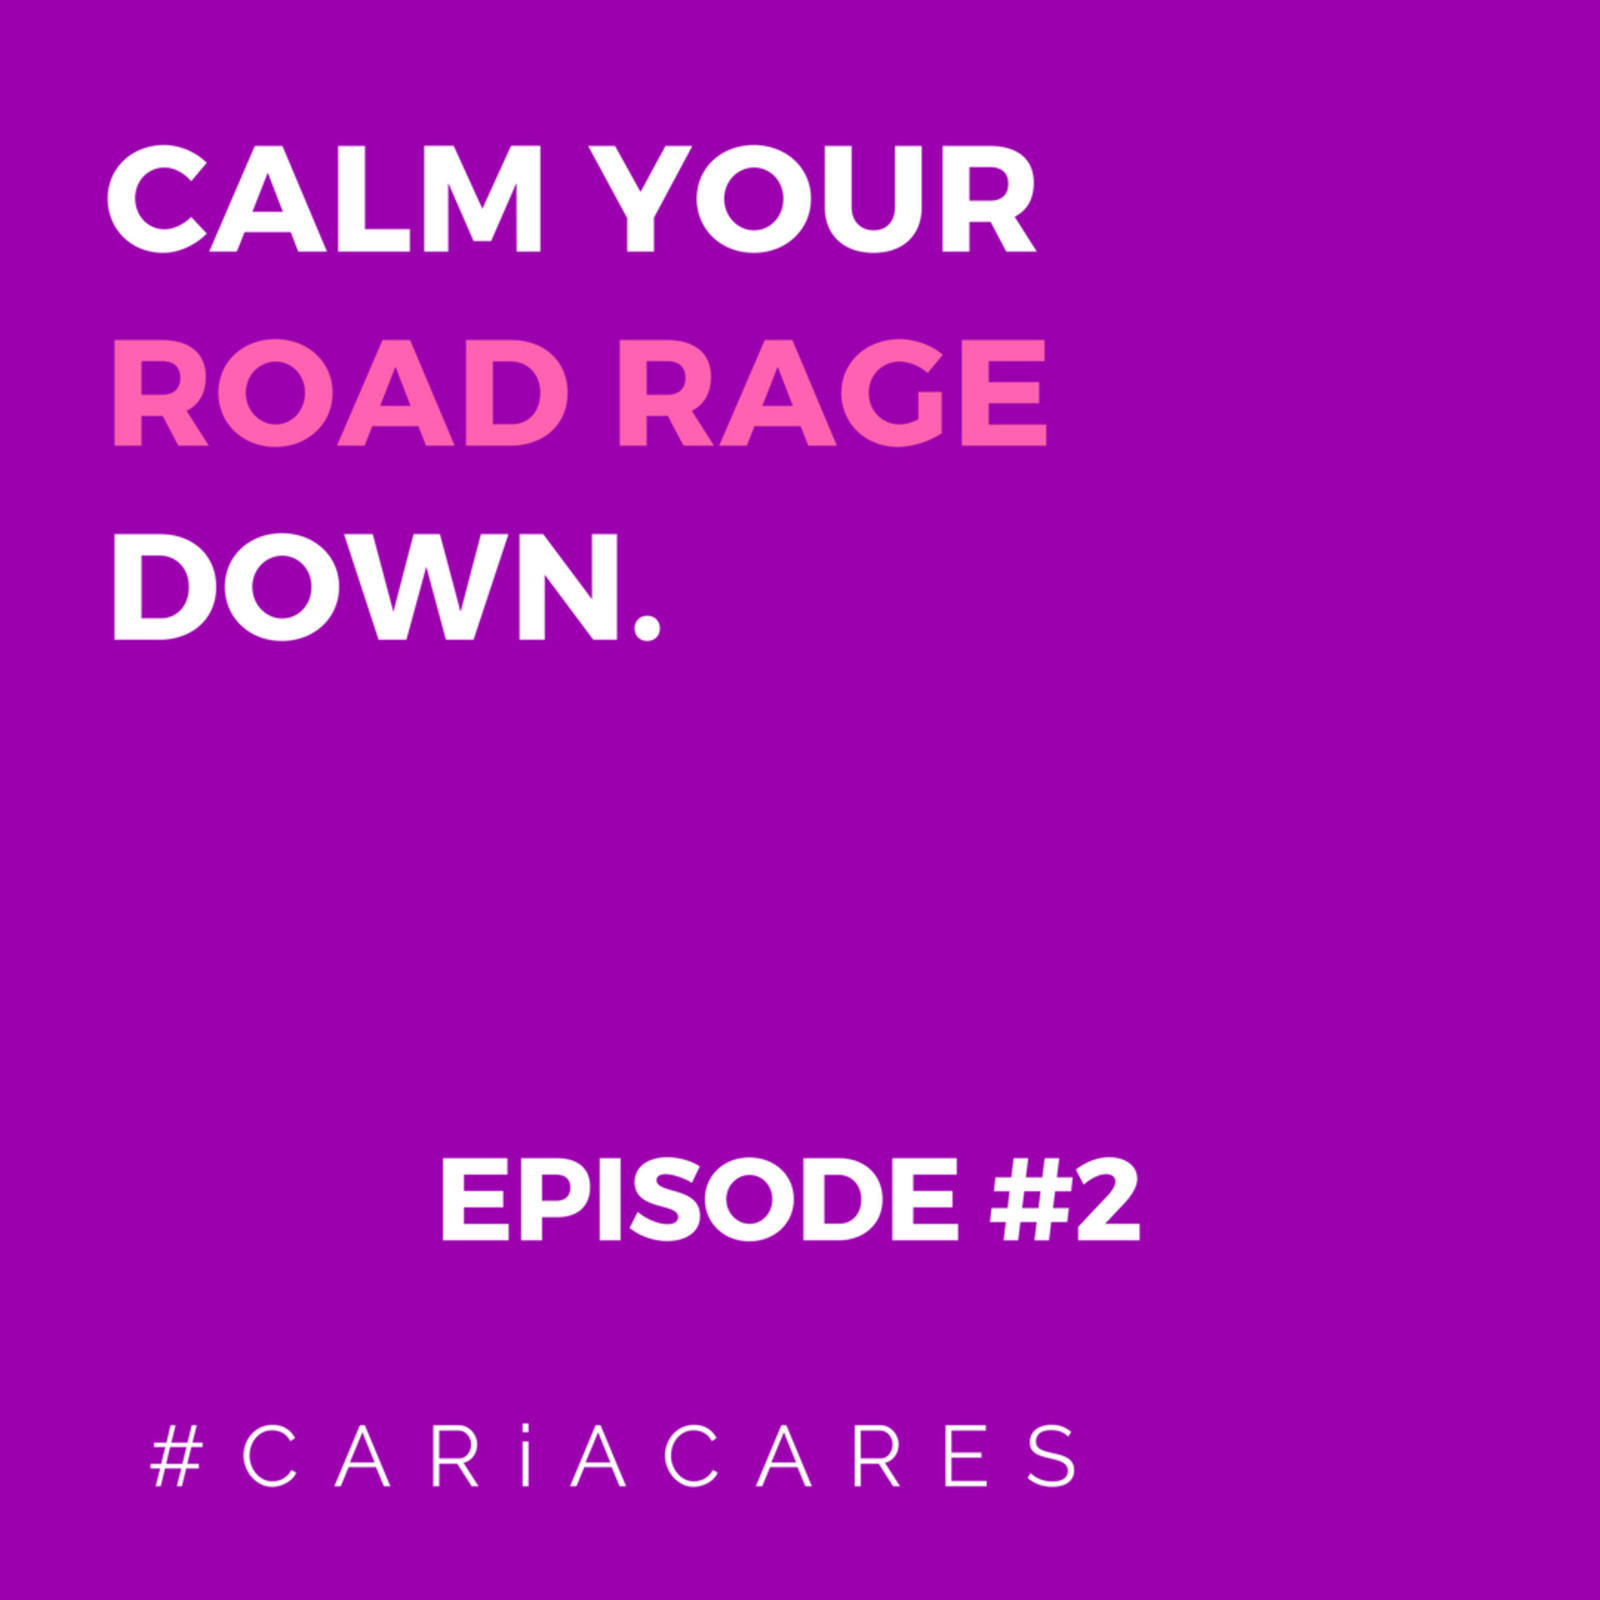 Calm your road rage down